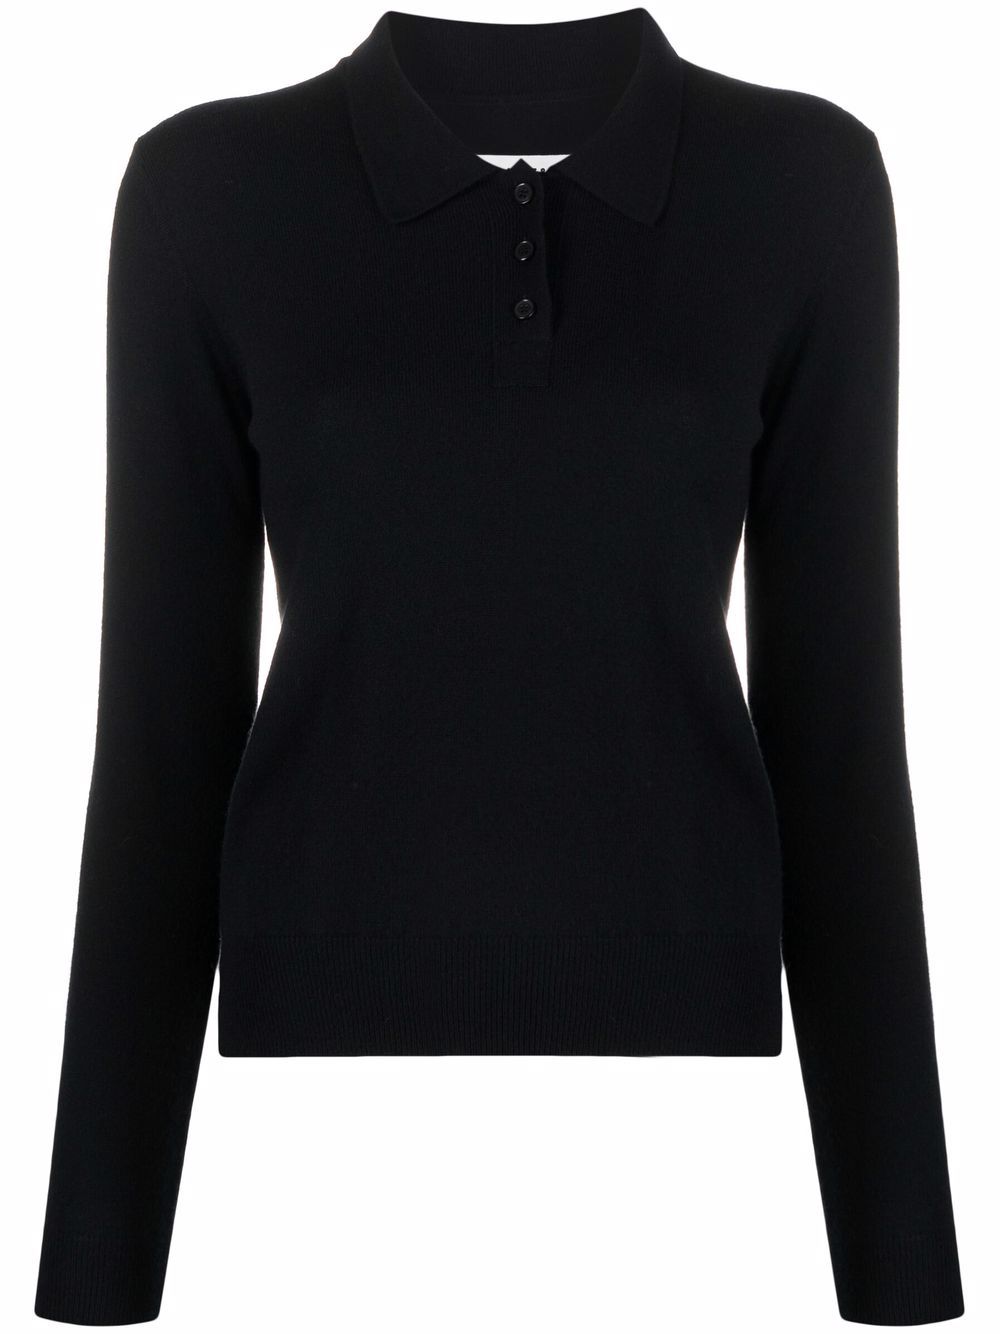 polo-neck wool knit top